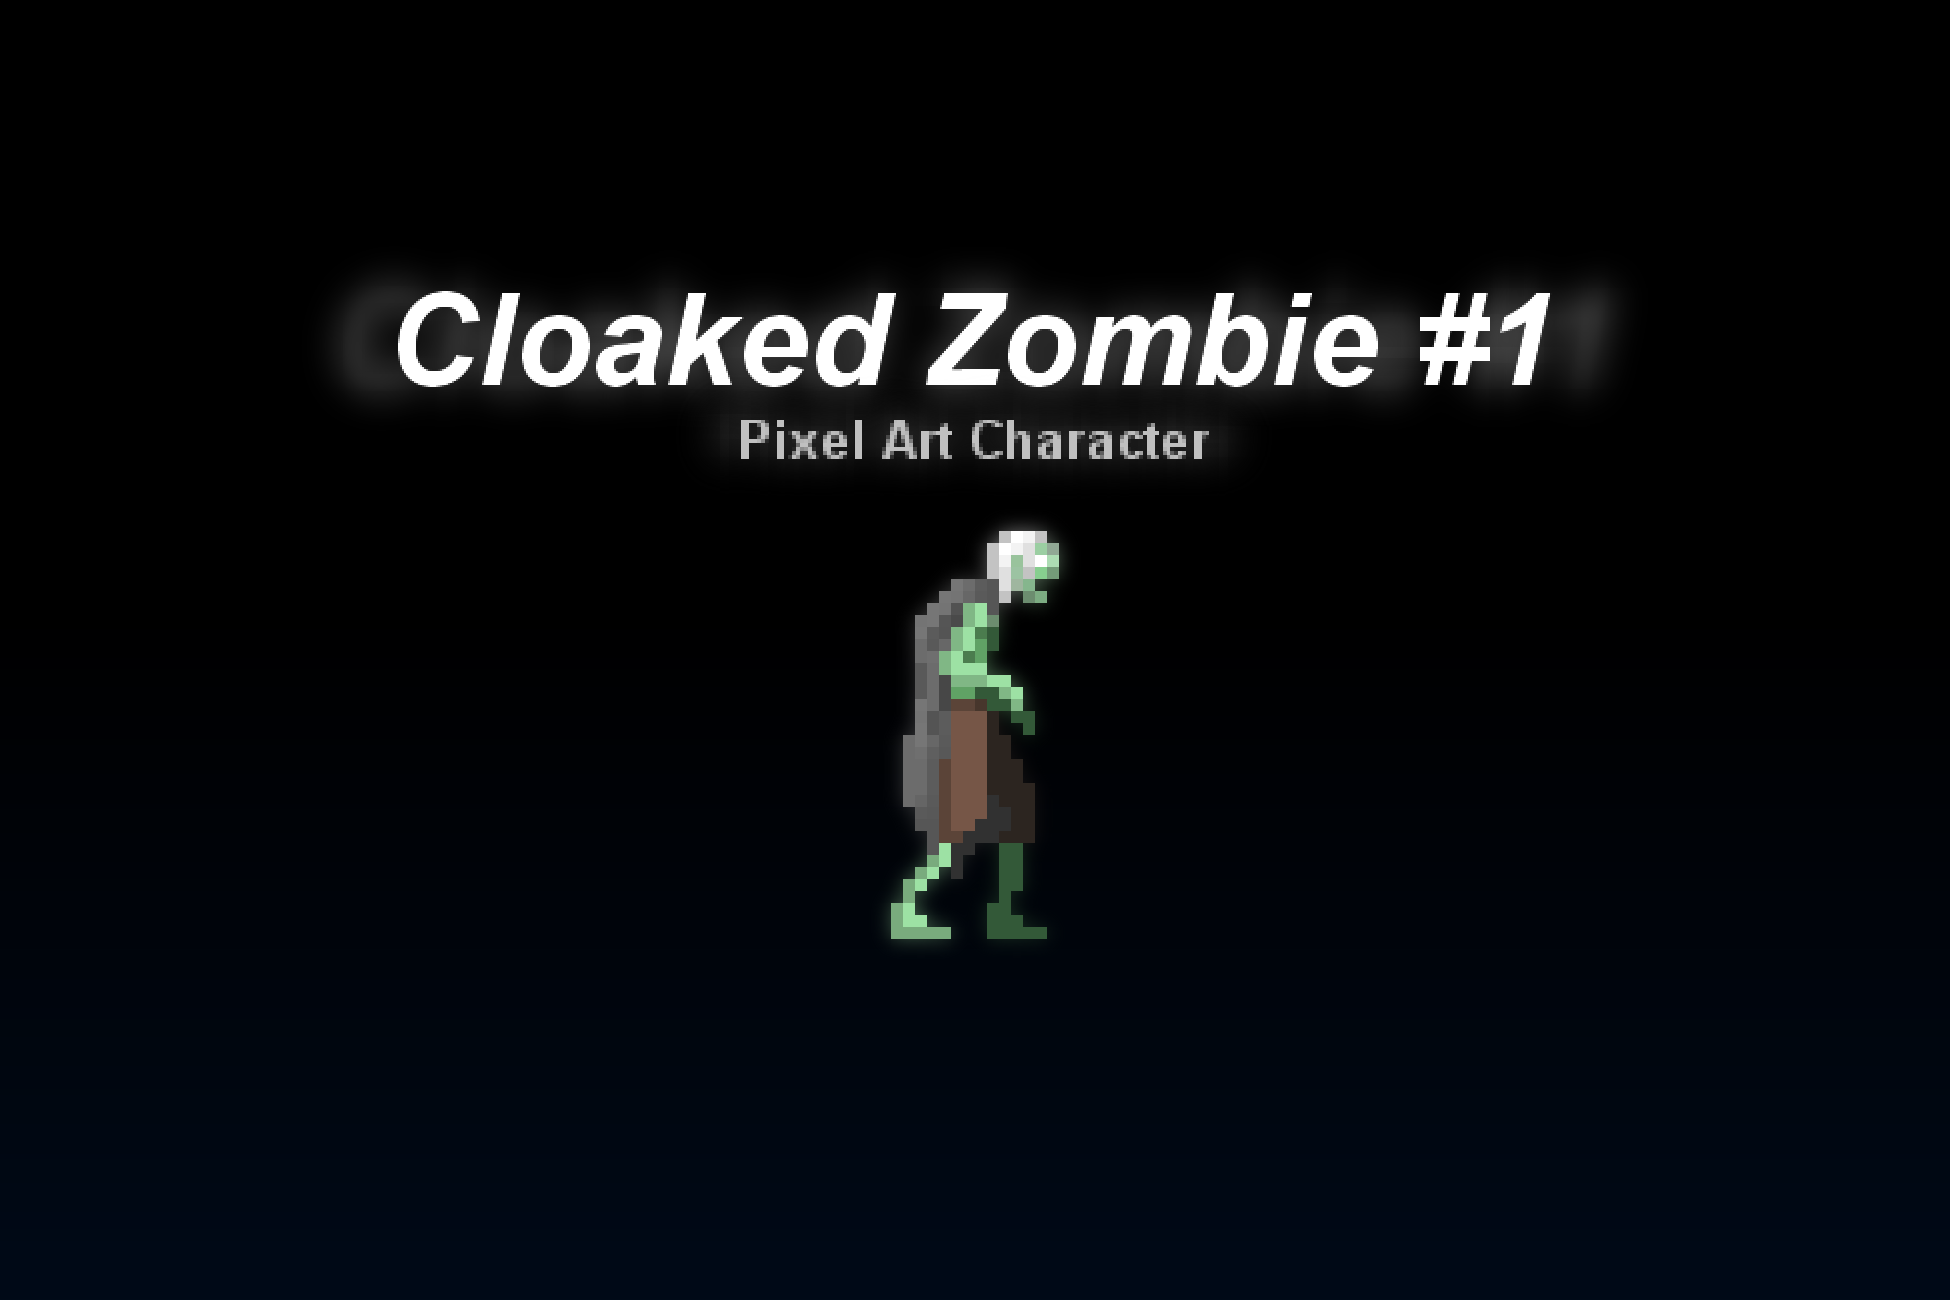 Cloaked Zombie #1 - Pixel Art Character